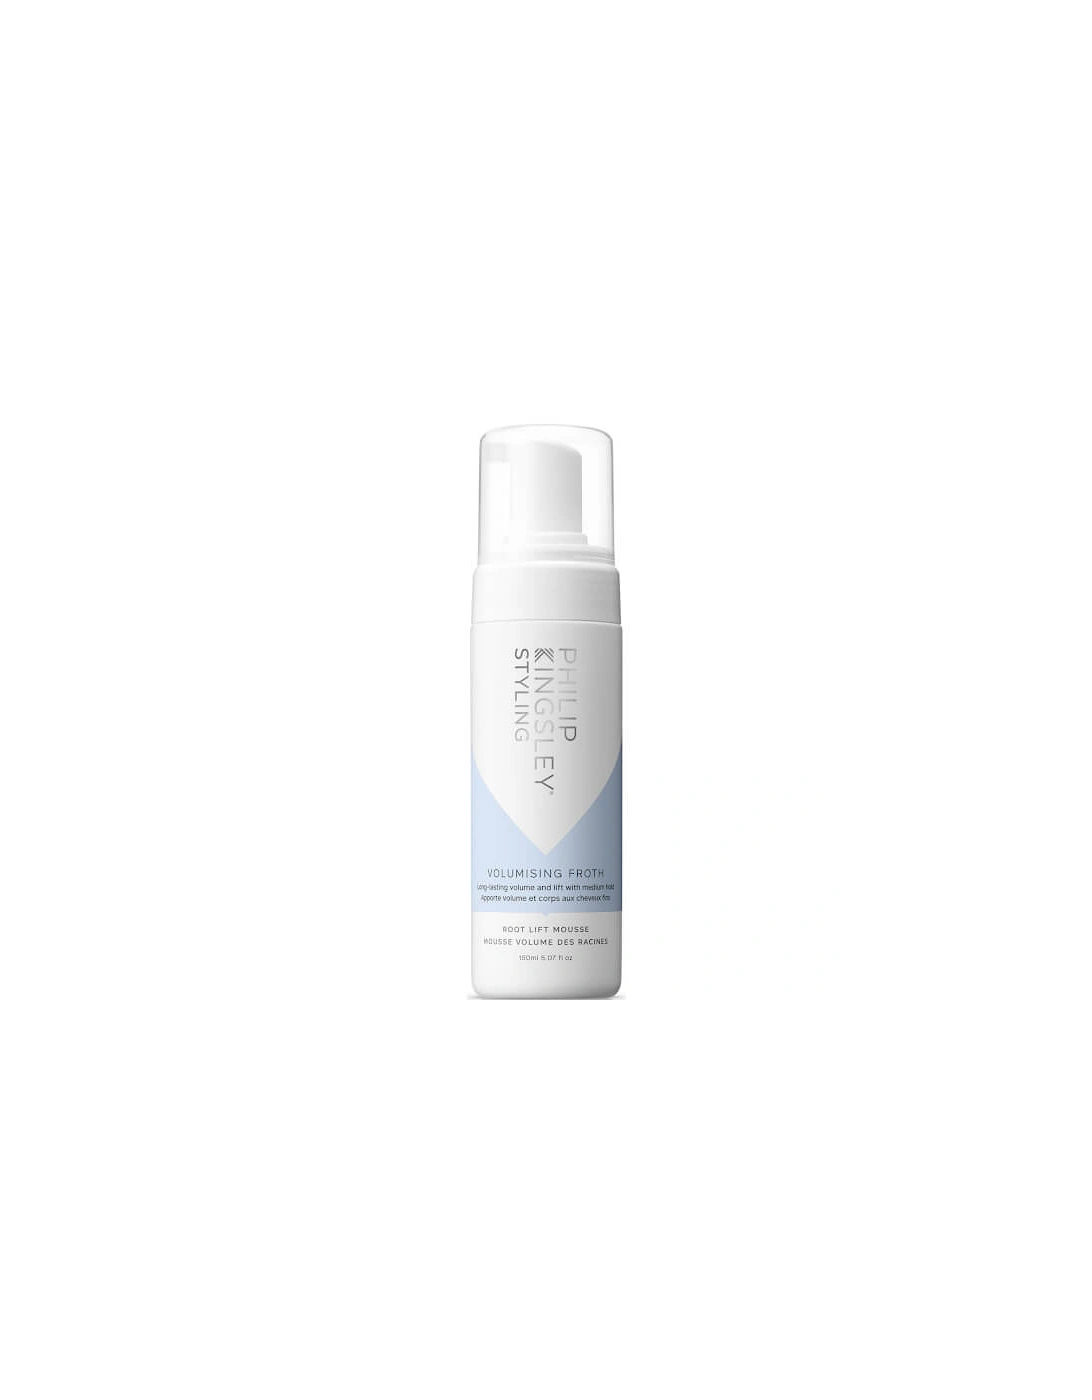 Volumising Froth Root Lift Mousse 150ml - Philip Kingsley, 2 of 1